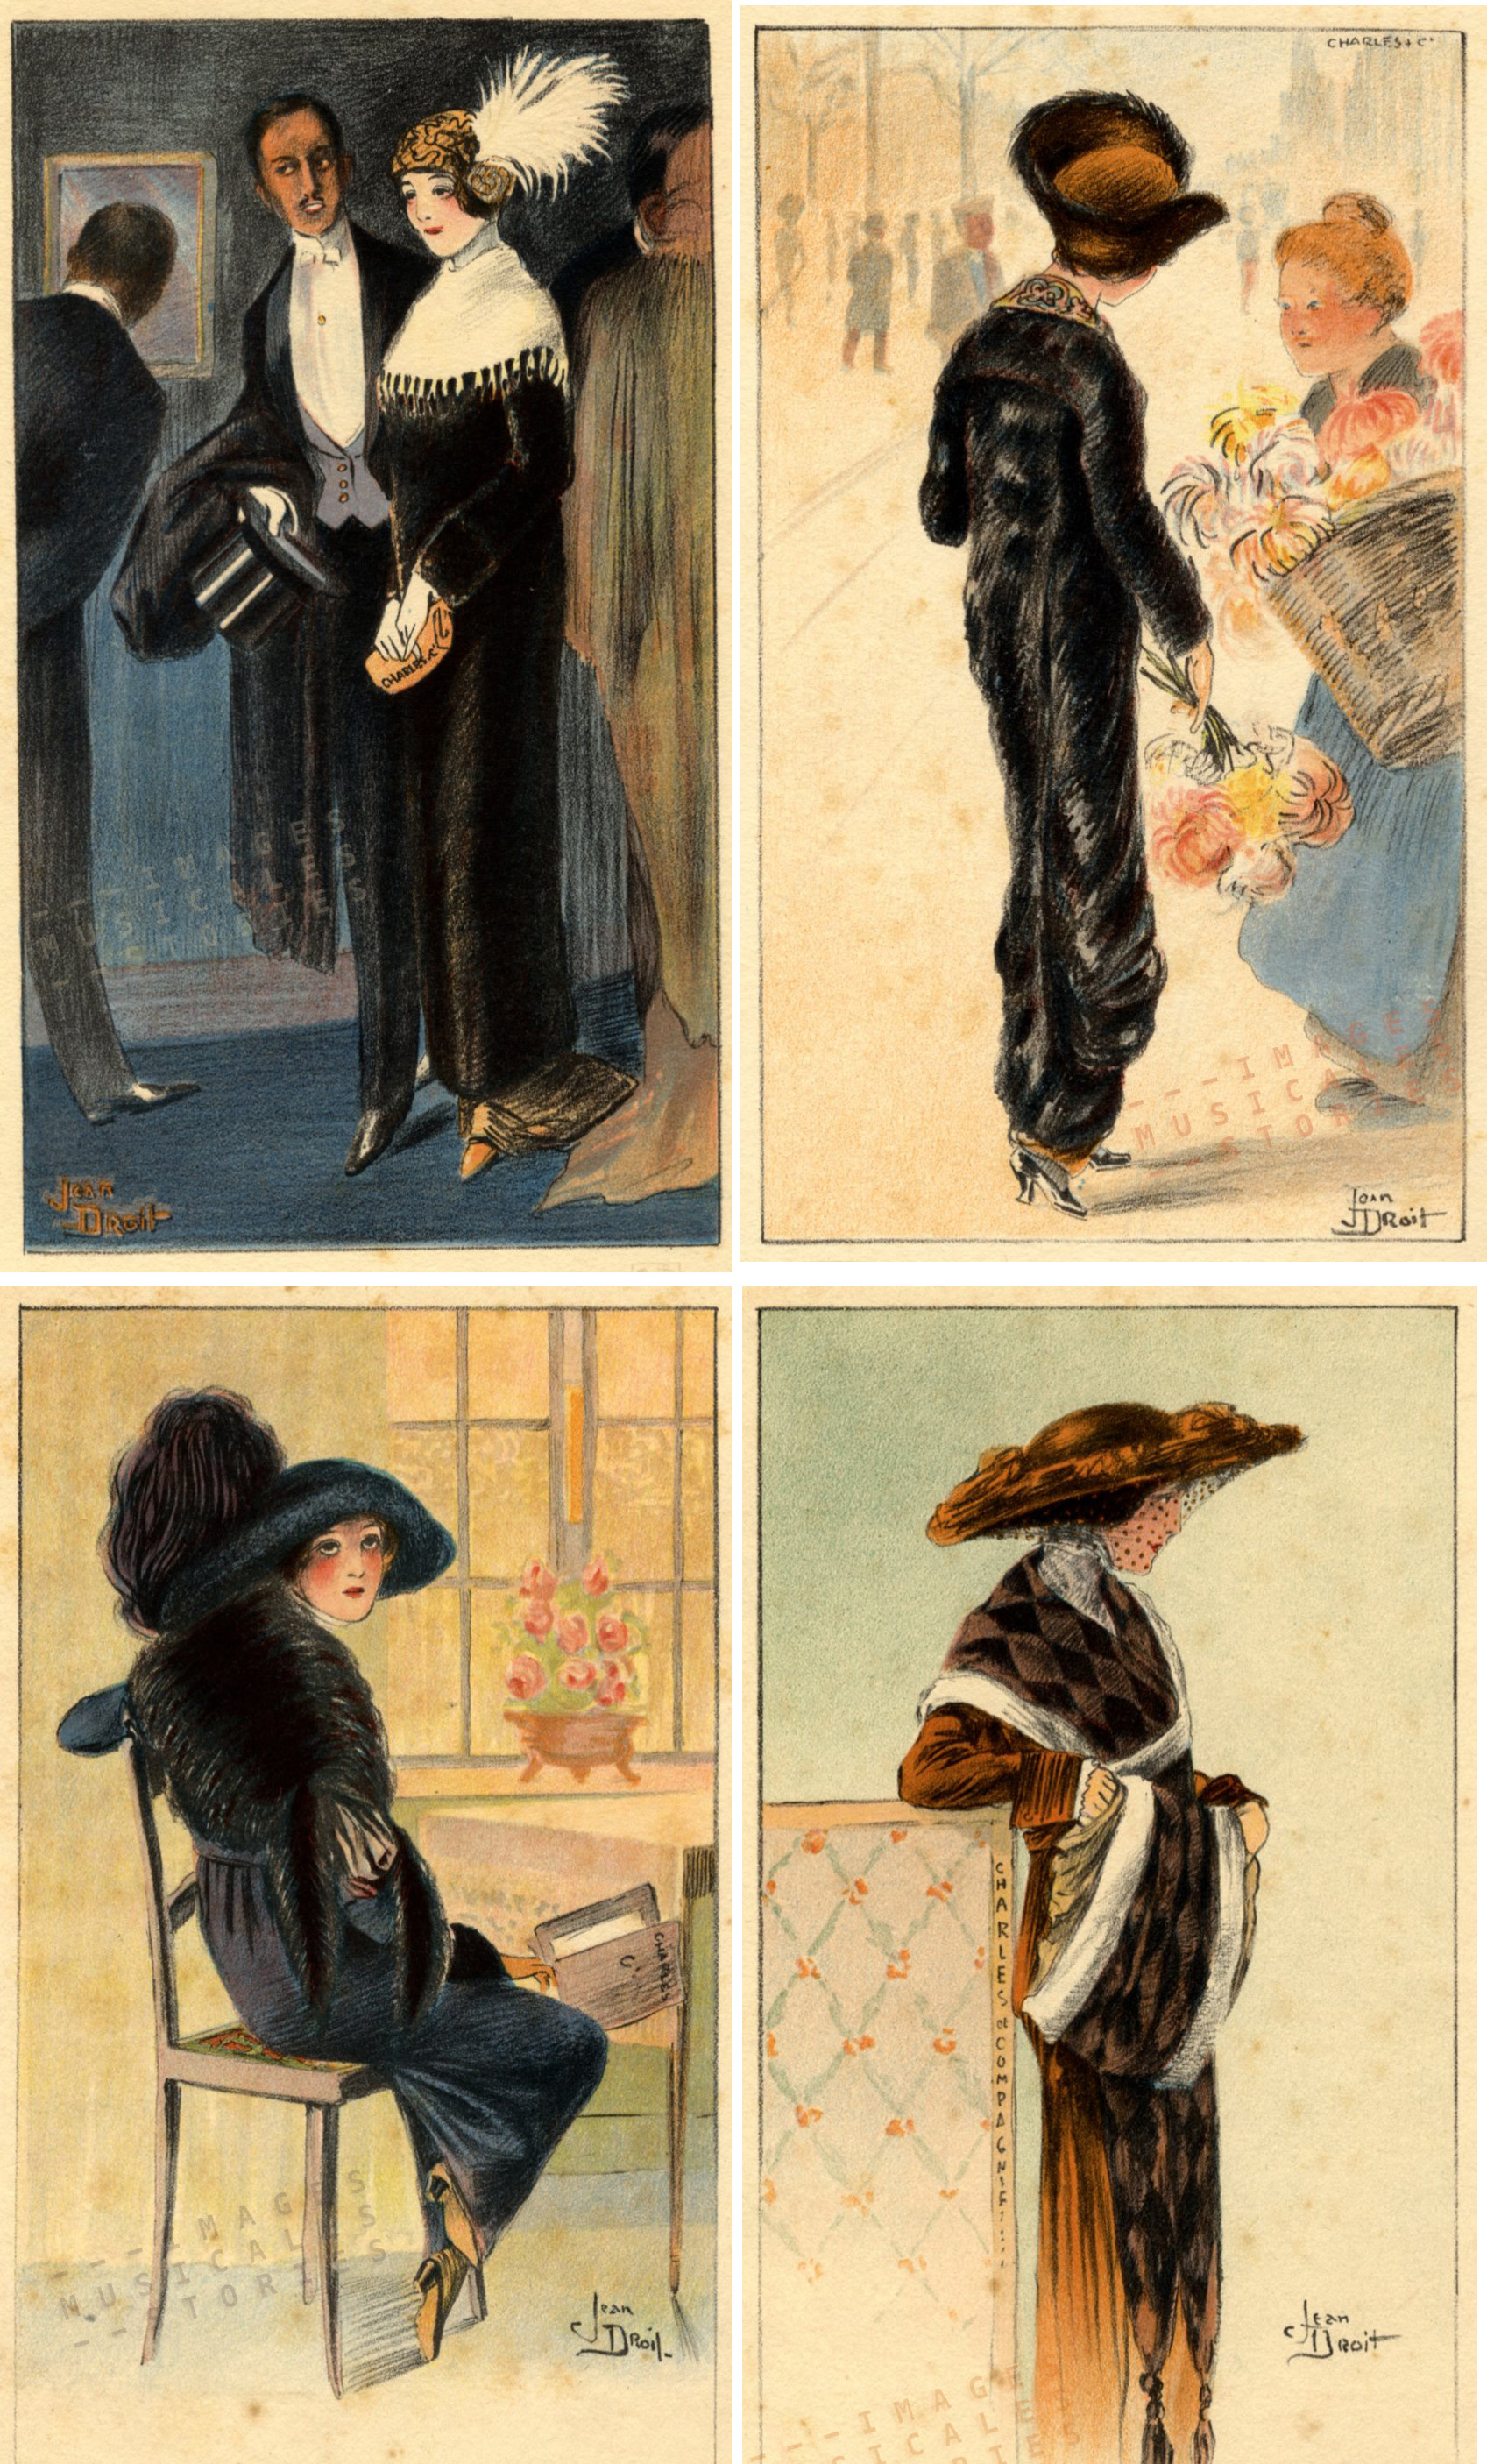 Four catalogue cards for Charles & Cie , illustrated by Jean Droit (Liège, s.d.)